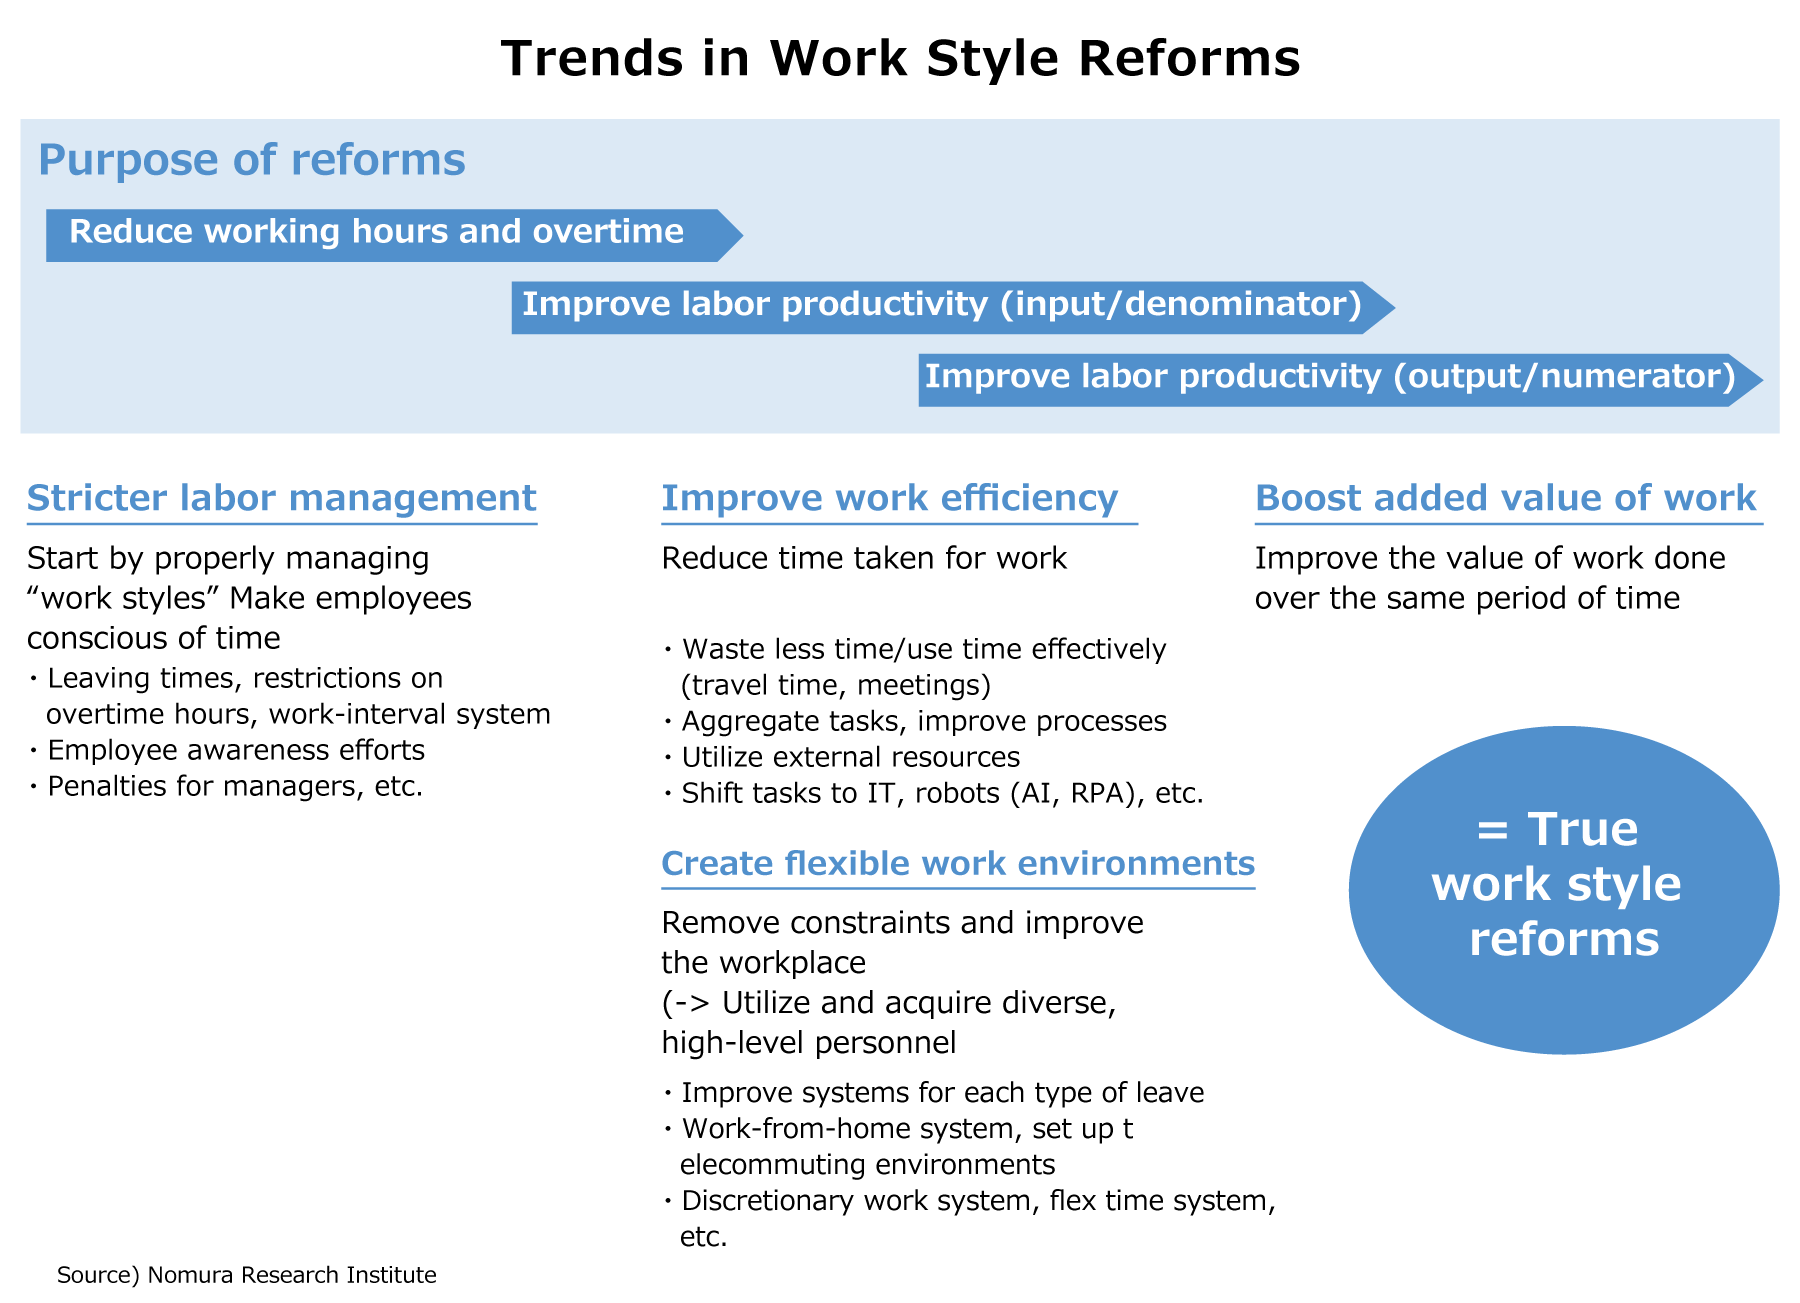 Trends in Work Style Reforms